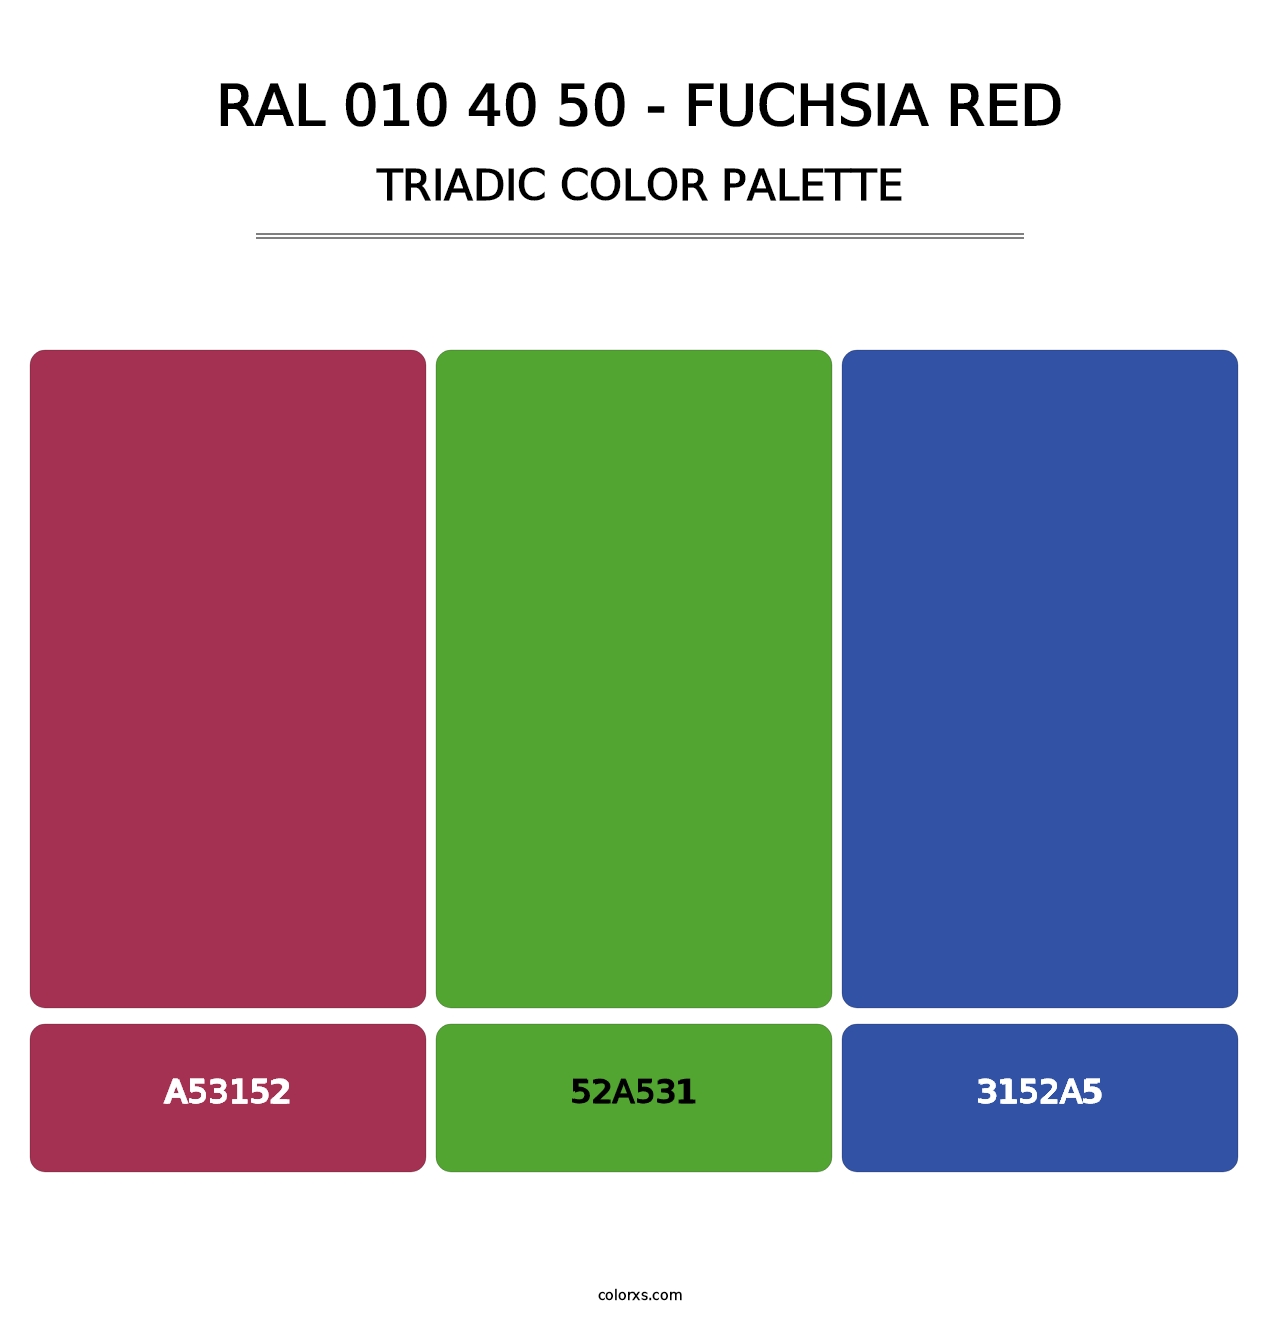 RAL 010 40 50 - Fuchsia Red - Triadic Color Palette